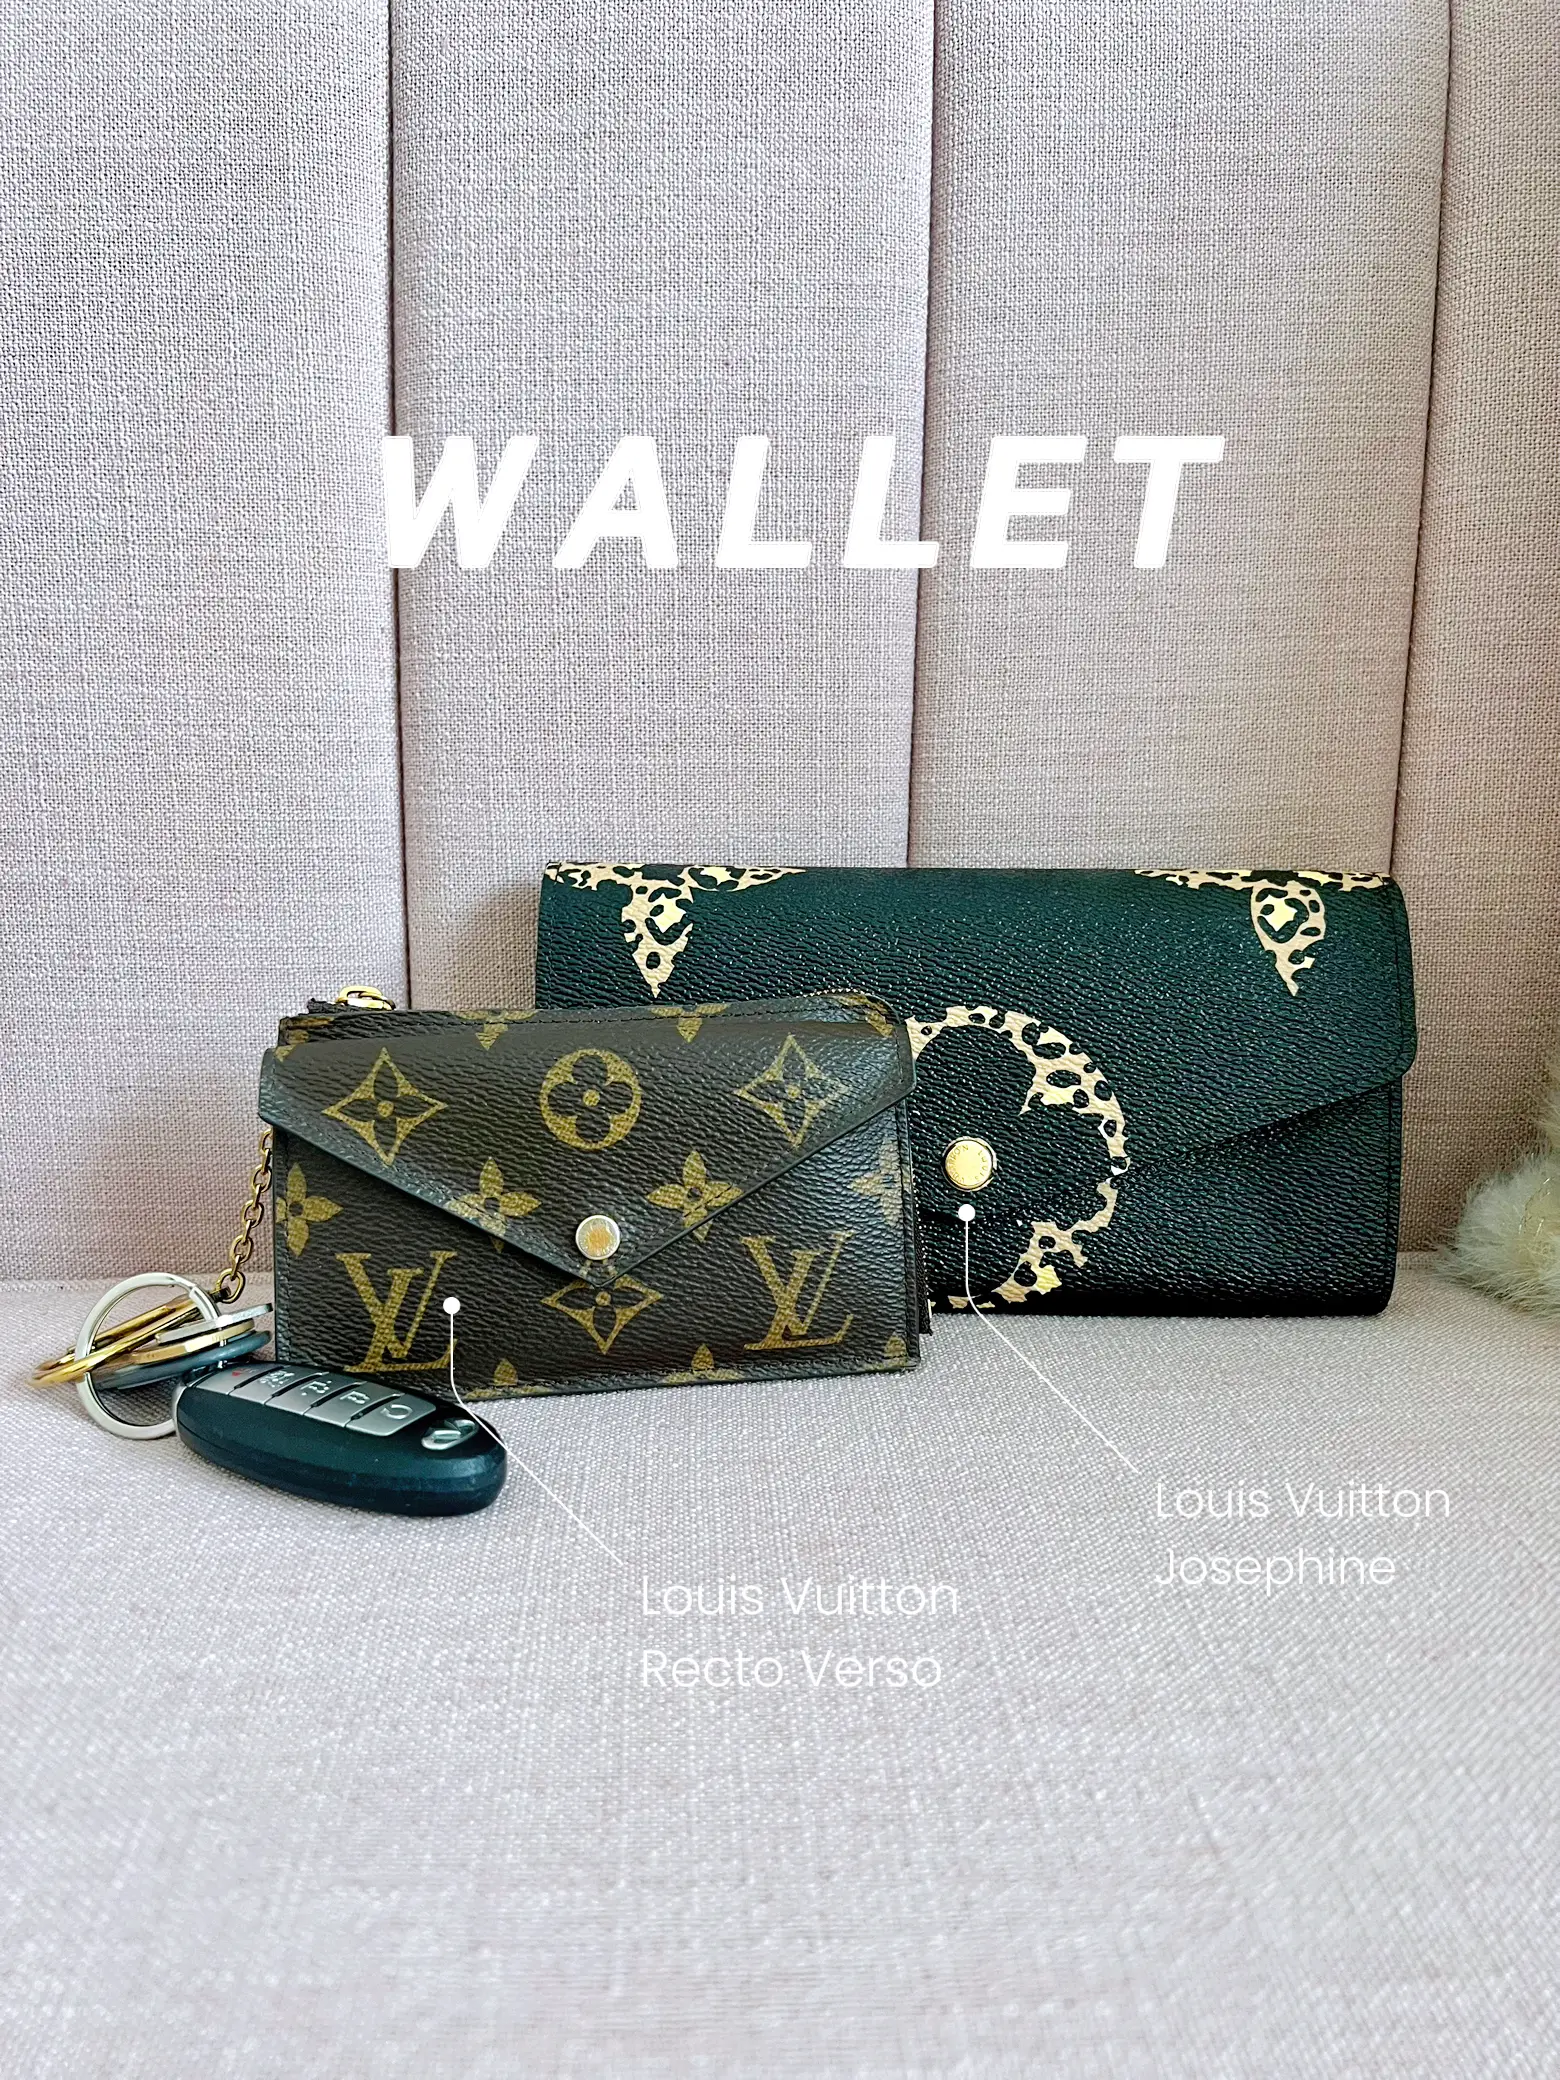 Valerie on X: #celebrities and #louisvuitton travel bag